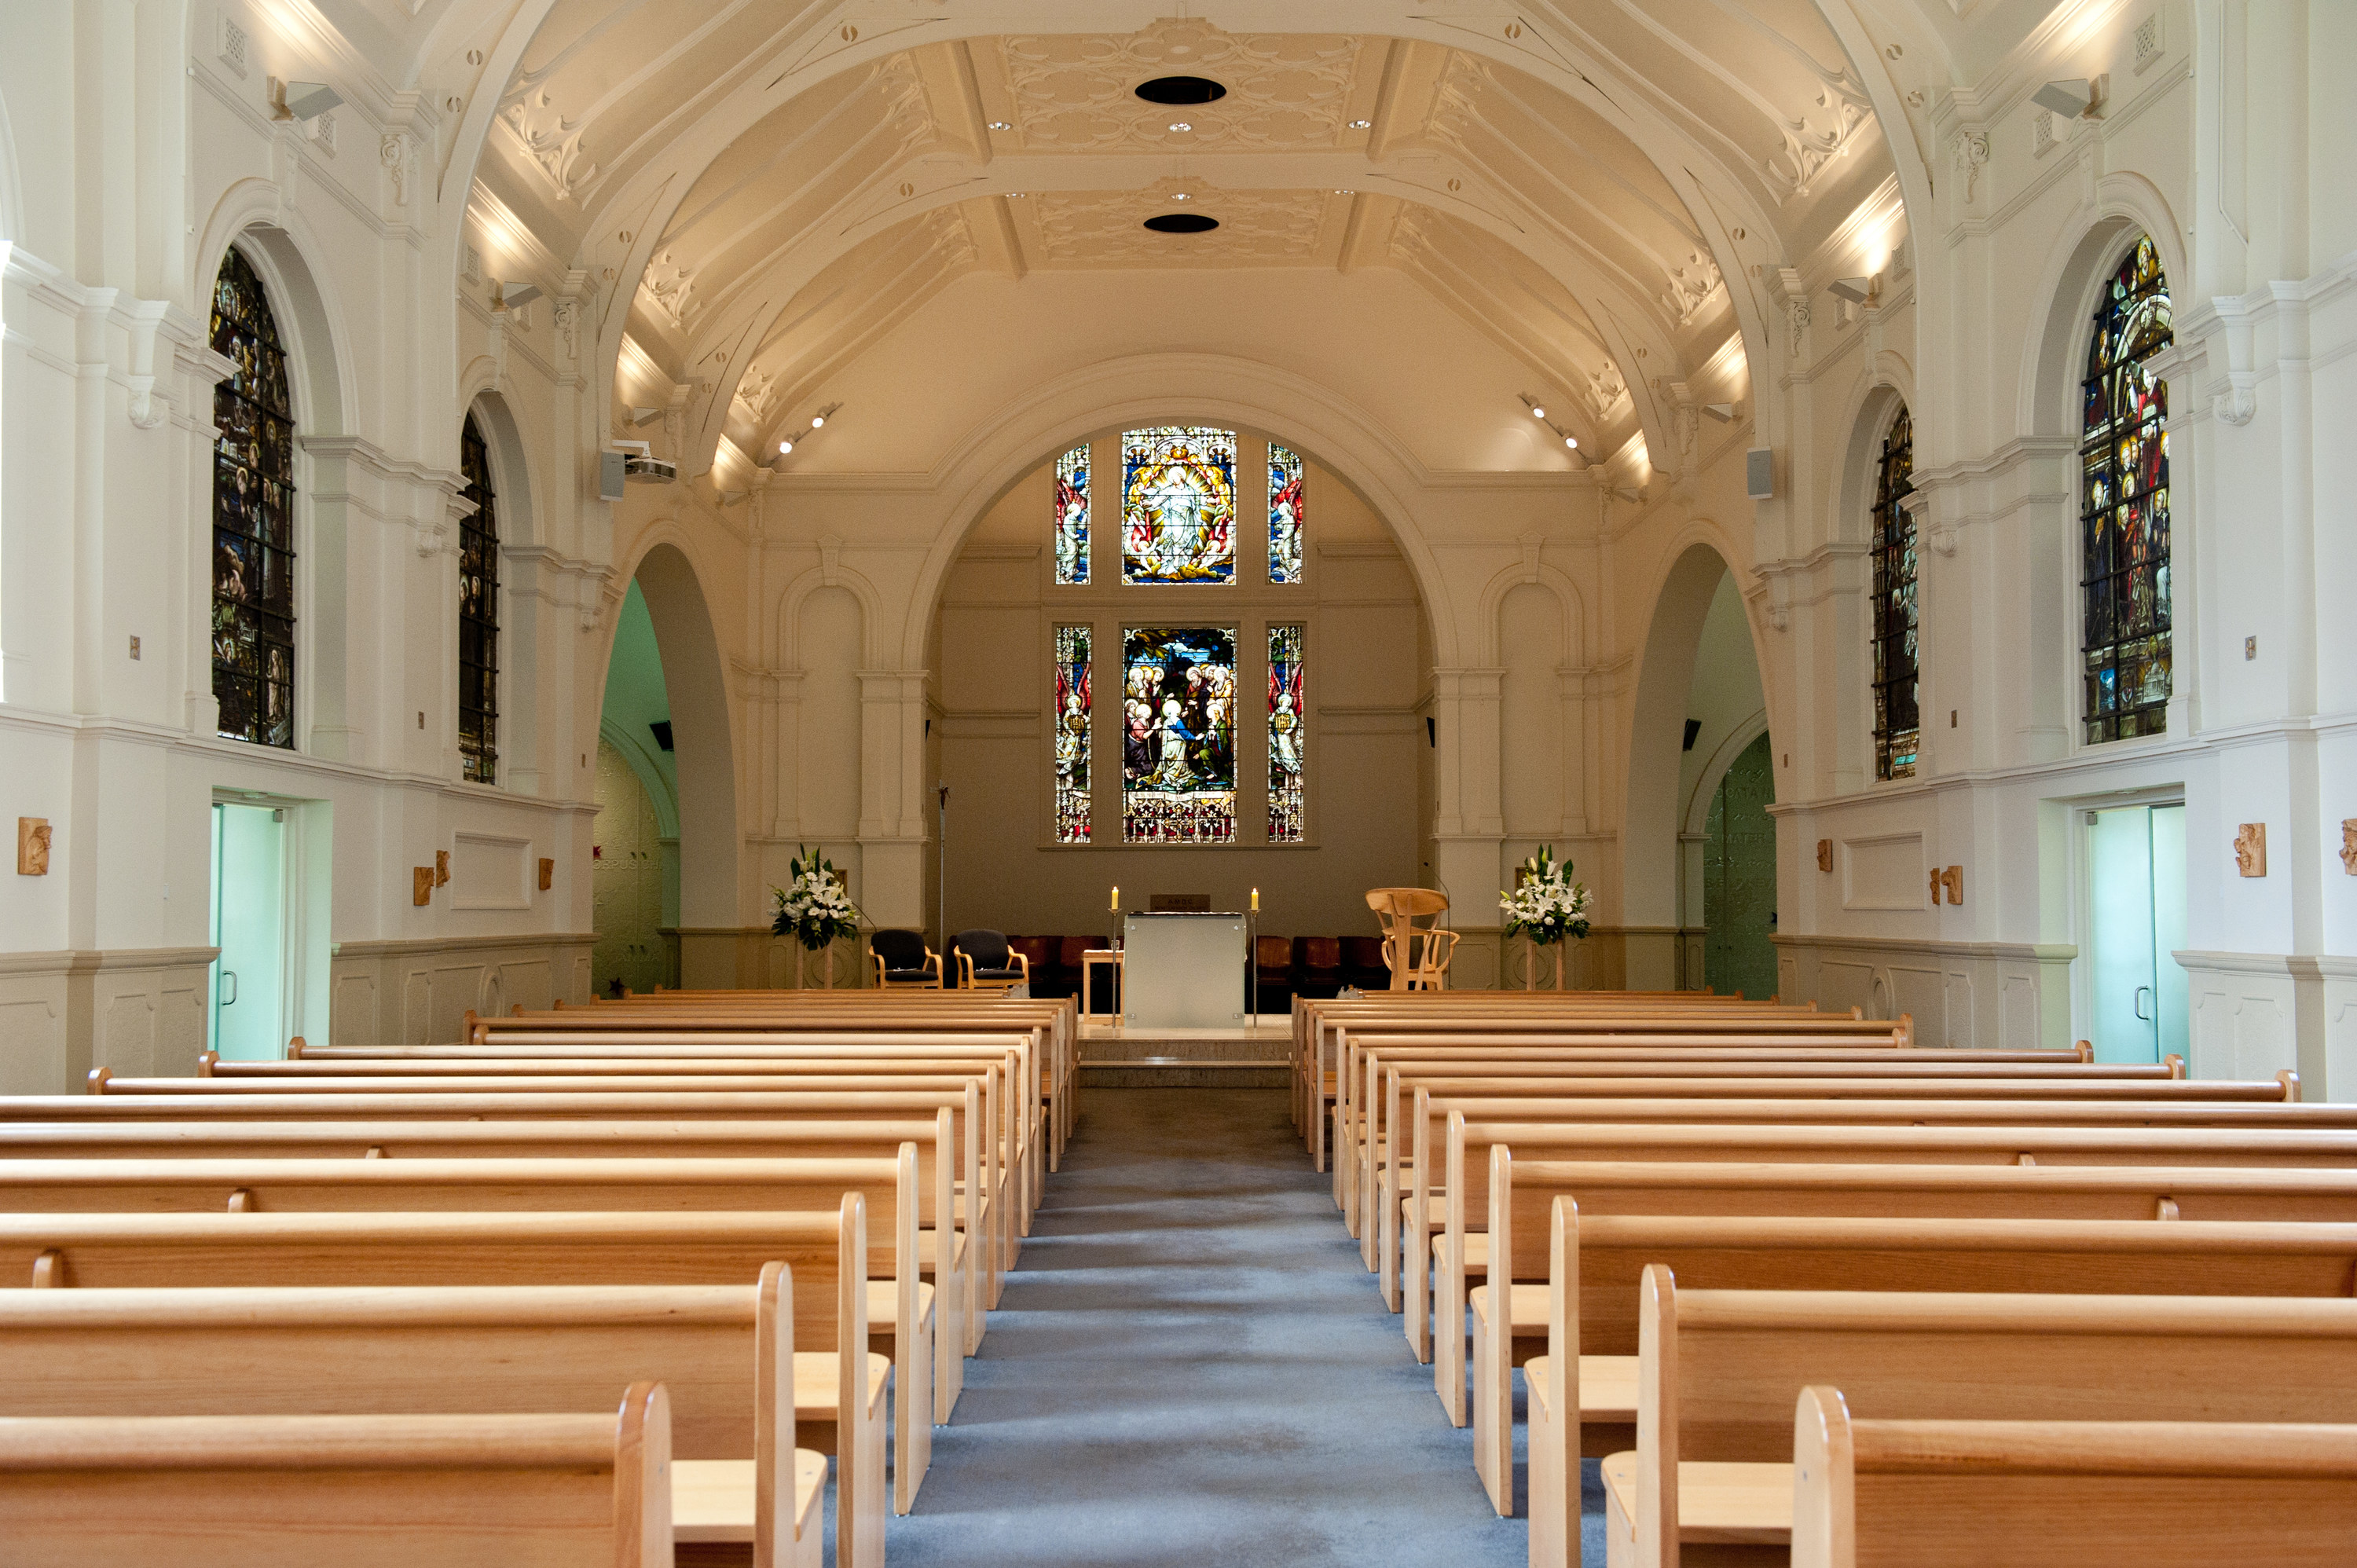 A church interior with pews